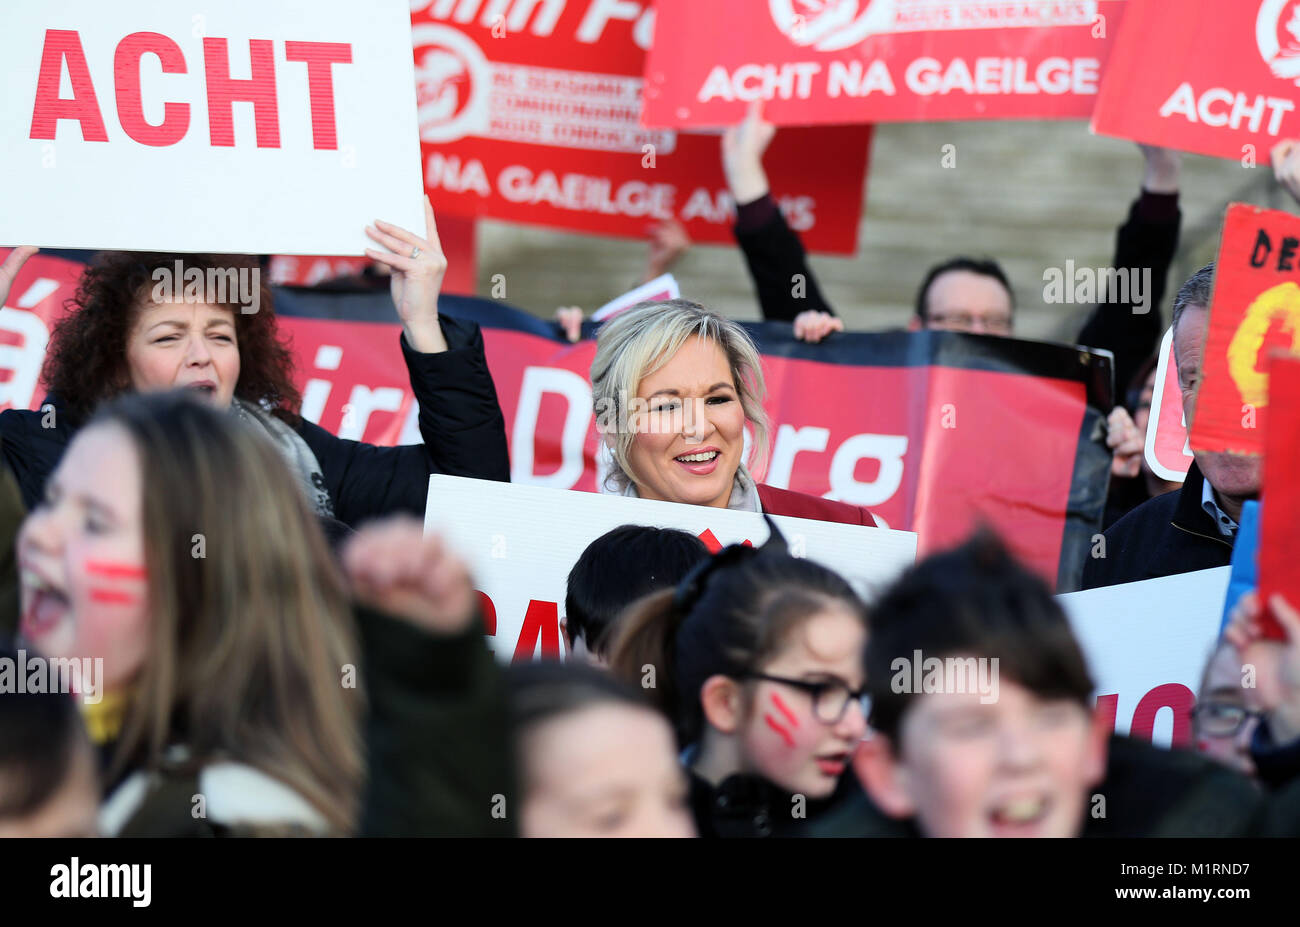 Sinn Fein leader in Northern Ireland Michelle O'Neill joins Irish language act campaigners, including pupils from Irish-medium schools across Northern Ireland, take part in a protest at Stormont parliament buildings in Belfast, ahead of their meeting with Northern Ireland Secretary Karen Bradley. Stock Photo